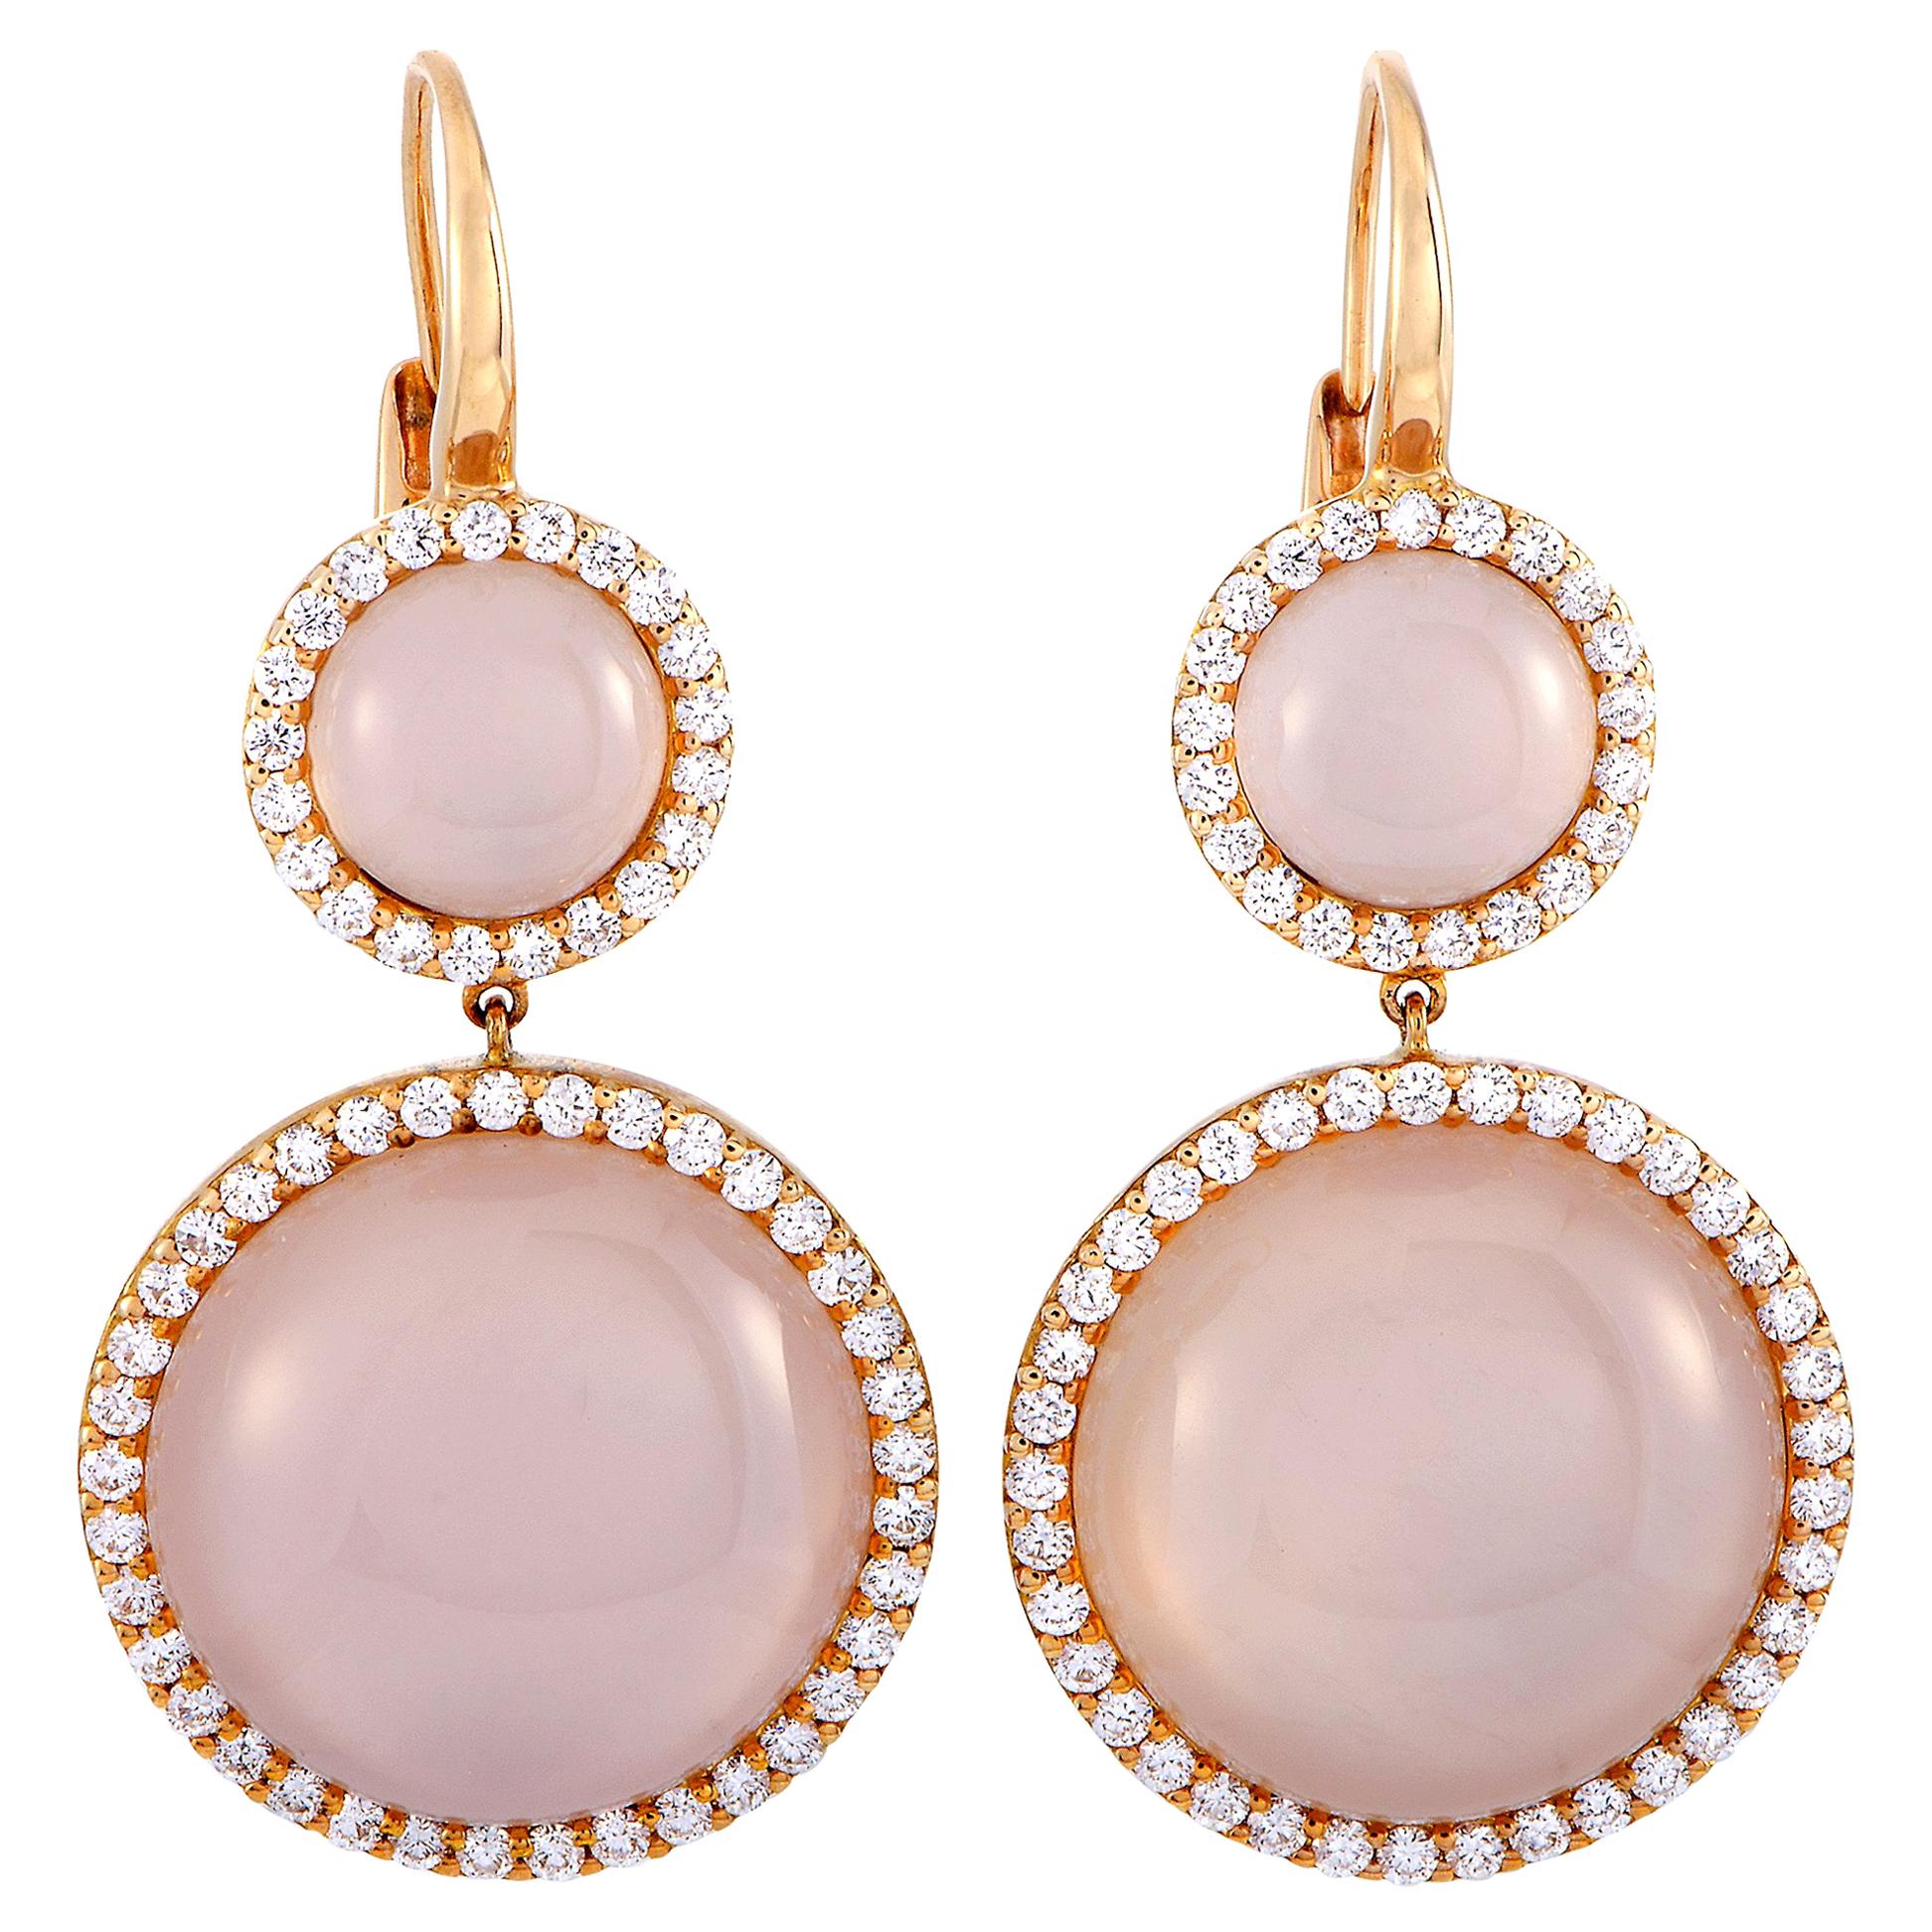 Roberto Coin 18 Karat Rose Gold Diamond Pave and Pink Quartz Lever Back Earrings